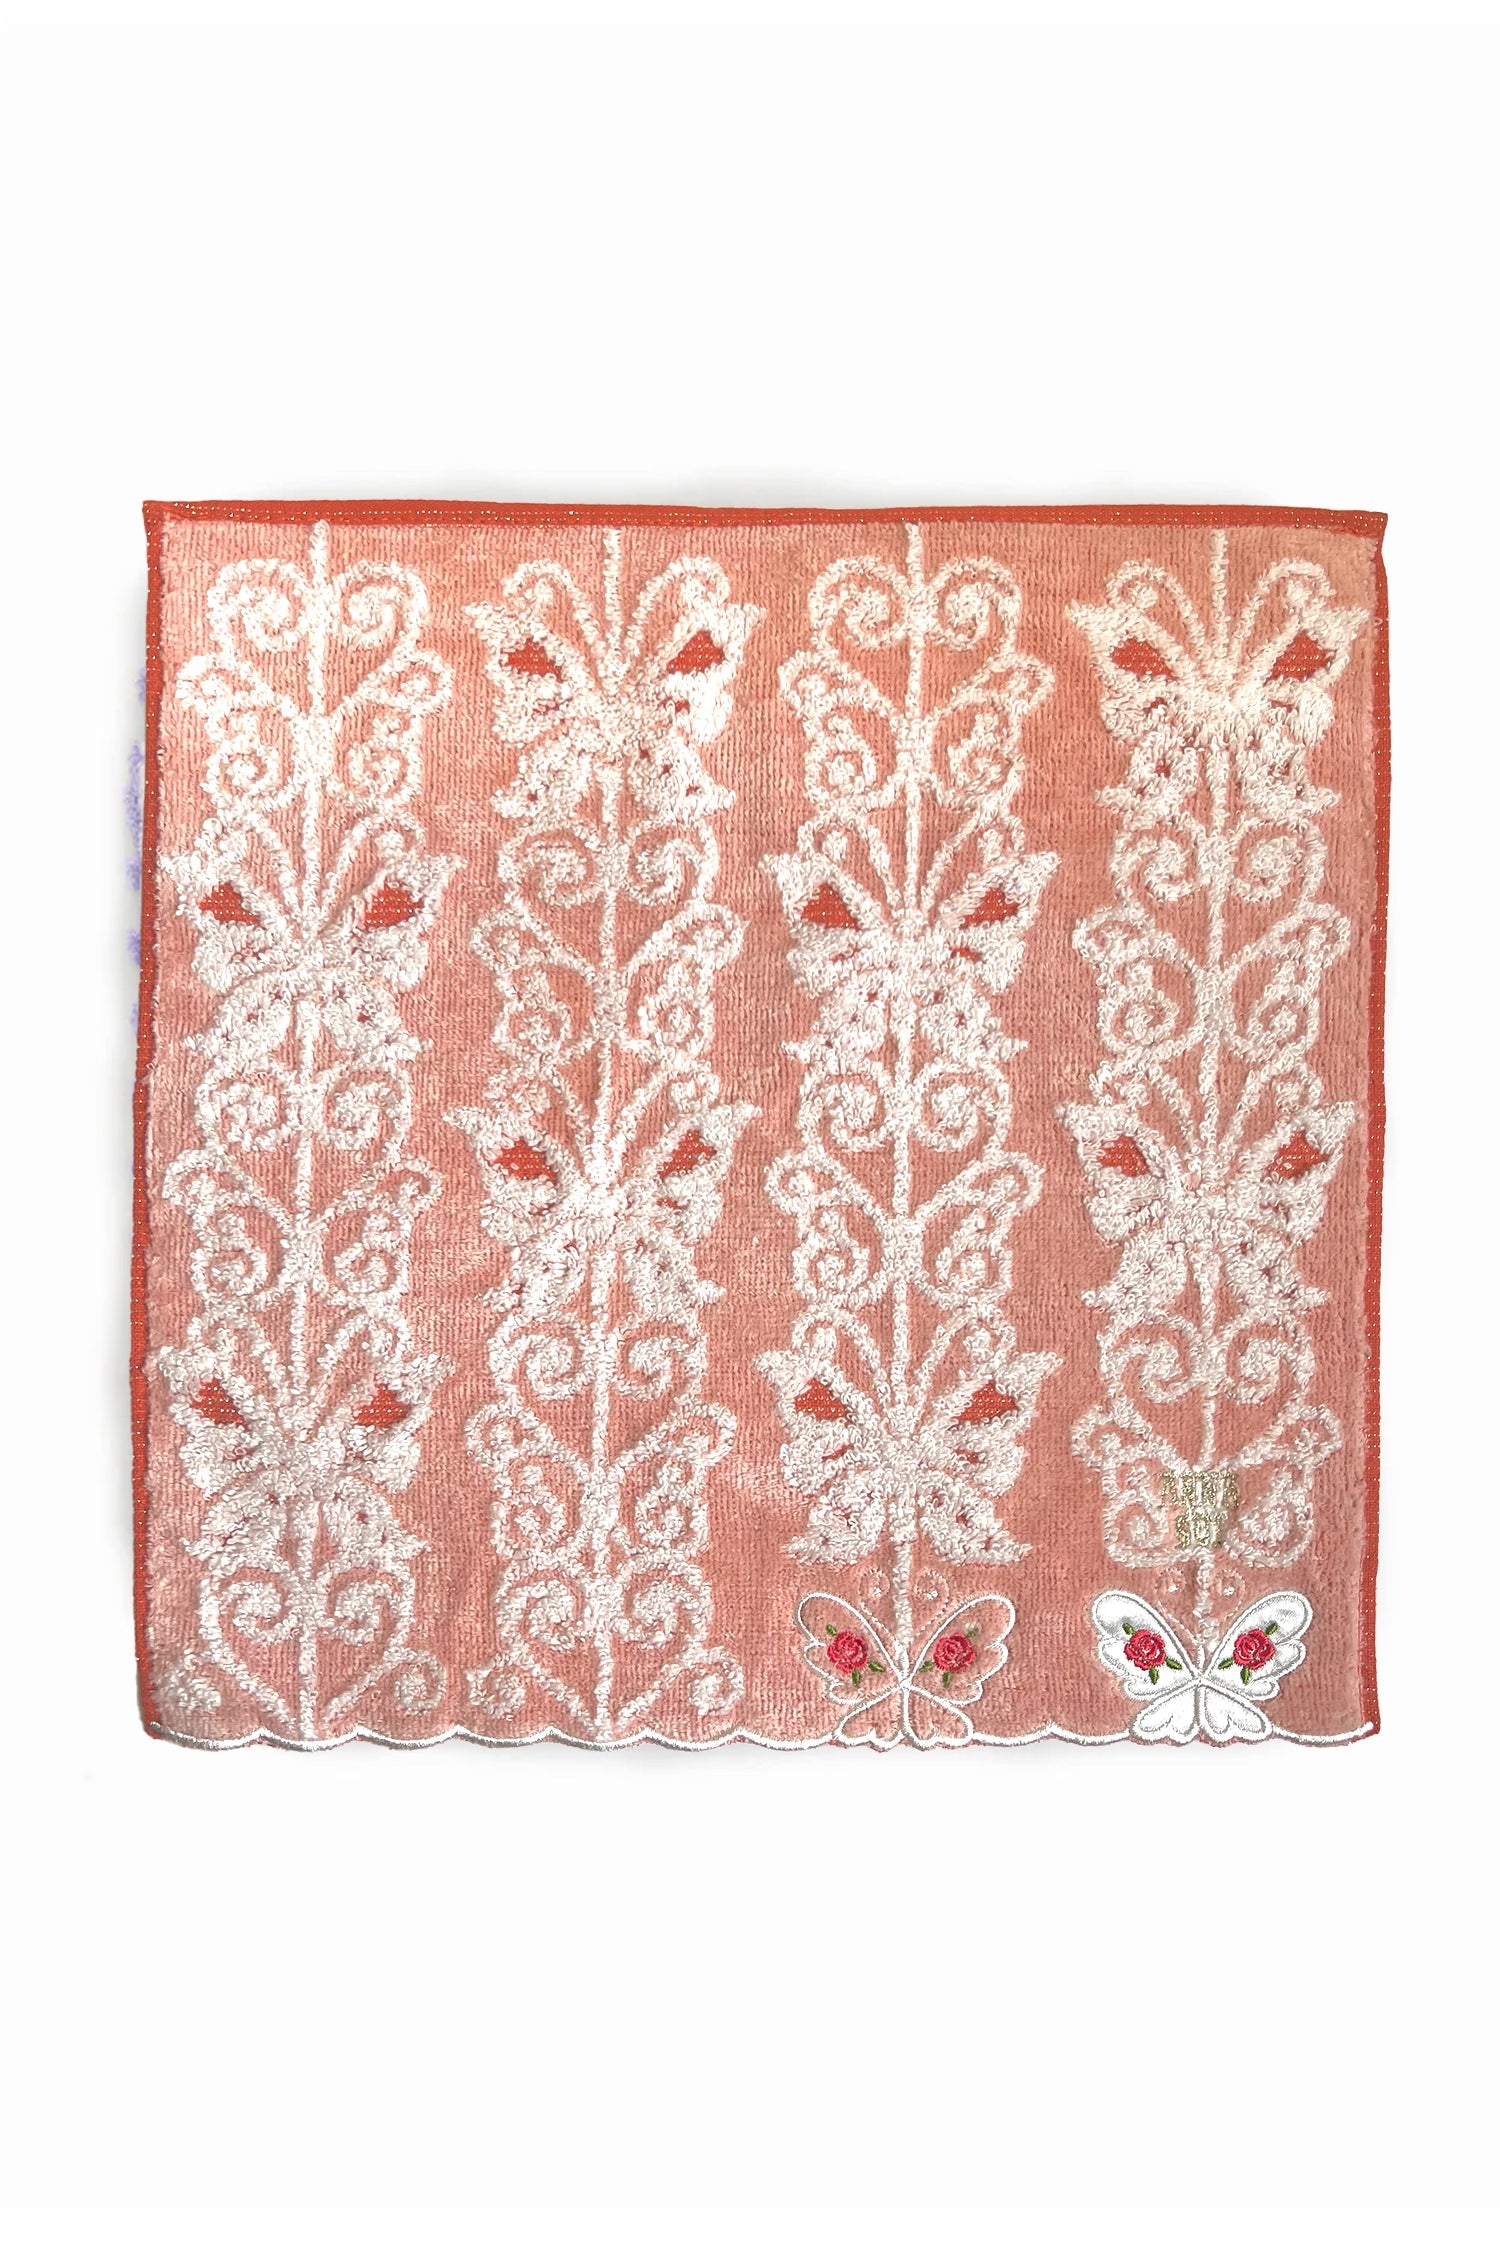 Light Orange Washcloth, white butterfly pattern, small floral details, 2 white butterflies, Anna Sui label 